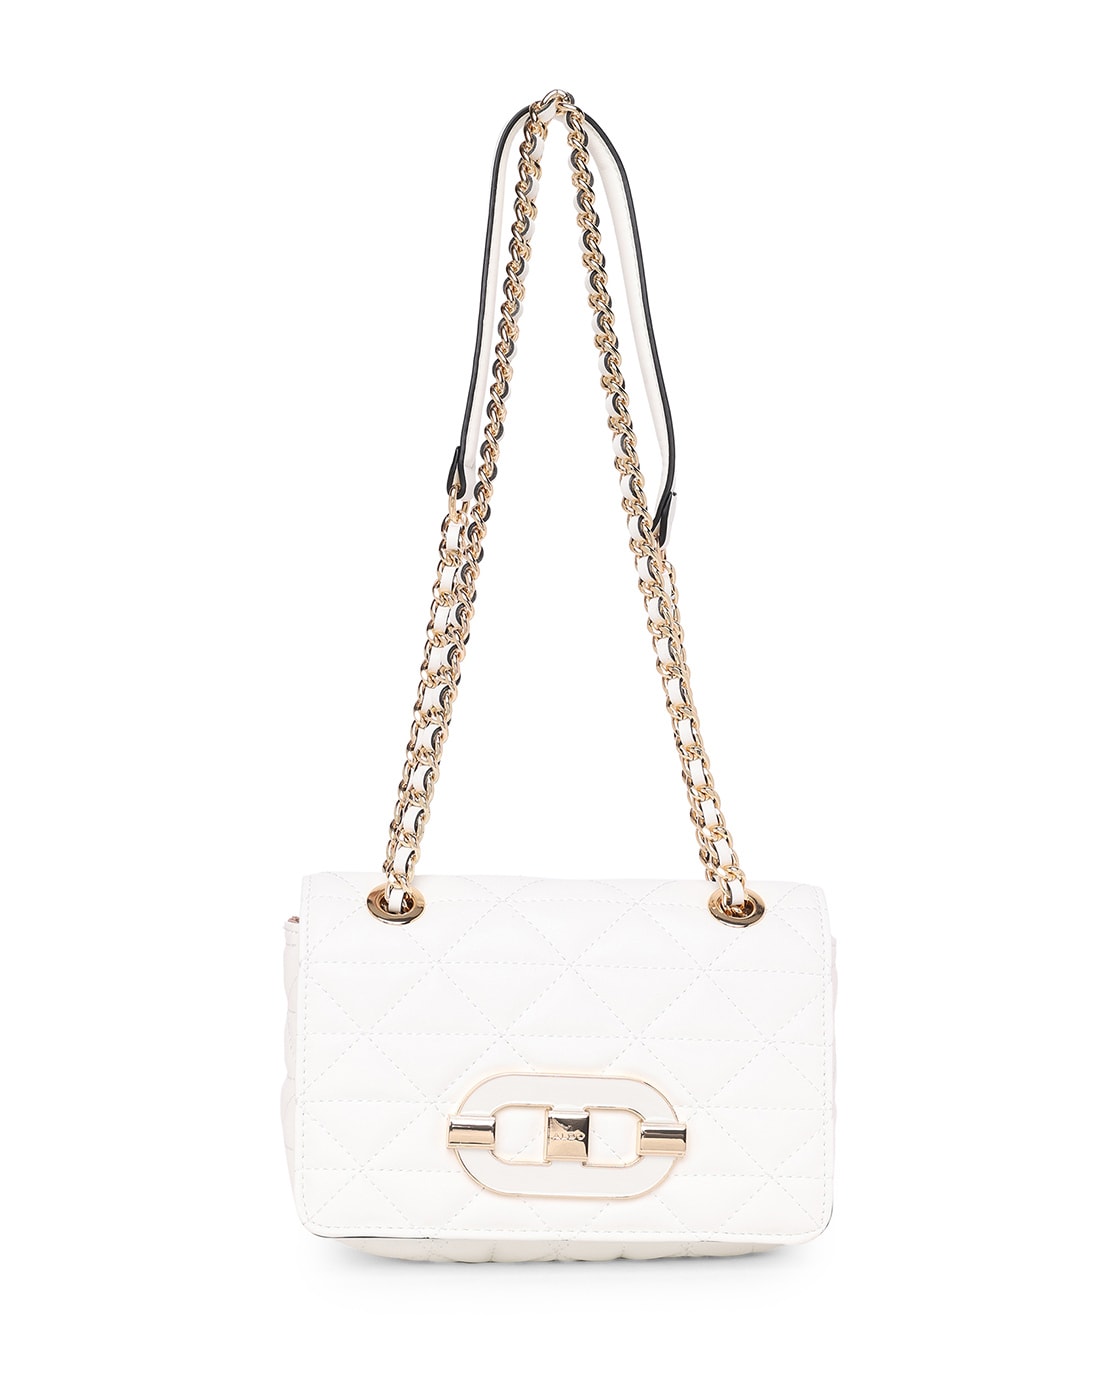 STELLA MCCARTNEY Frayme Small Crossbody Chain Bag Pure White | Pure  products, Chain bags, Stella mccartney